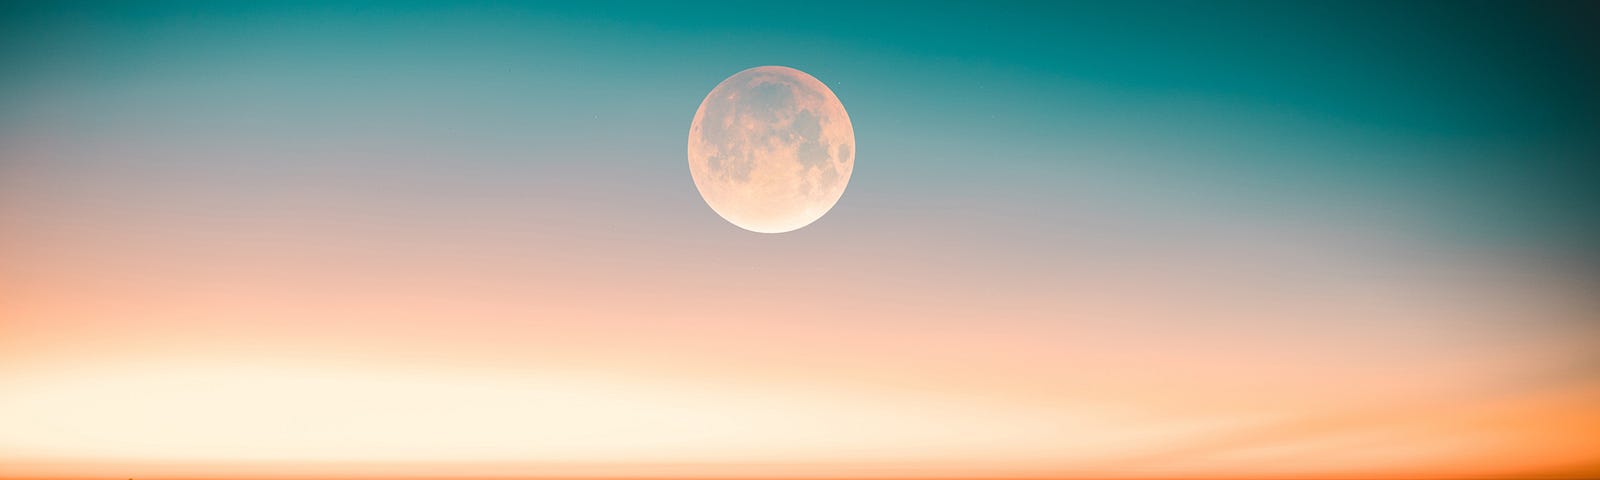 Photo of a moon over ocean, seen above shades of white, pink-peach and blues in the sky, mountains in foreground.